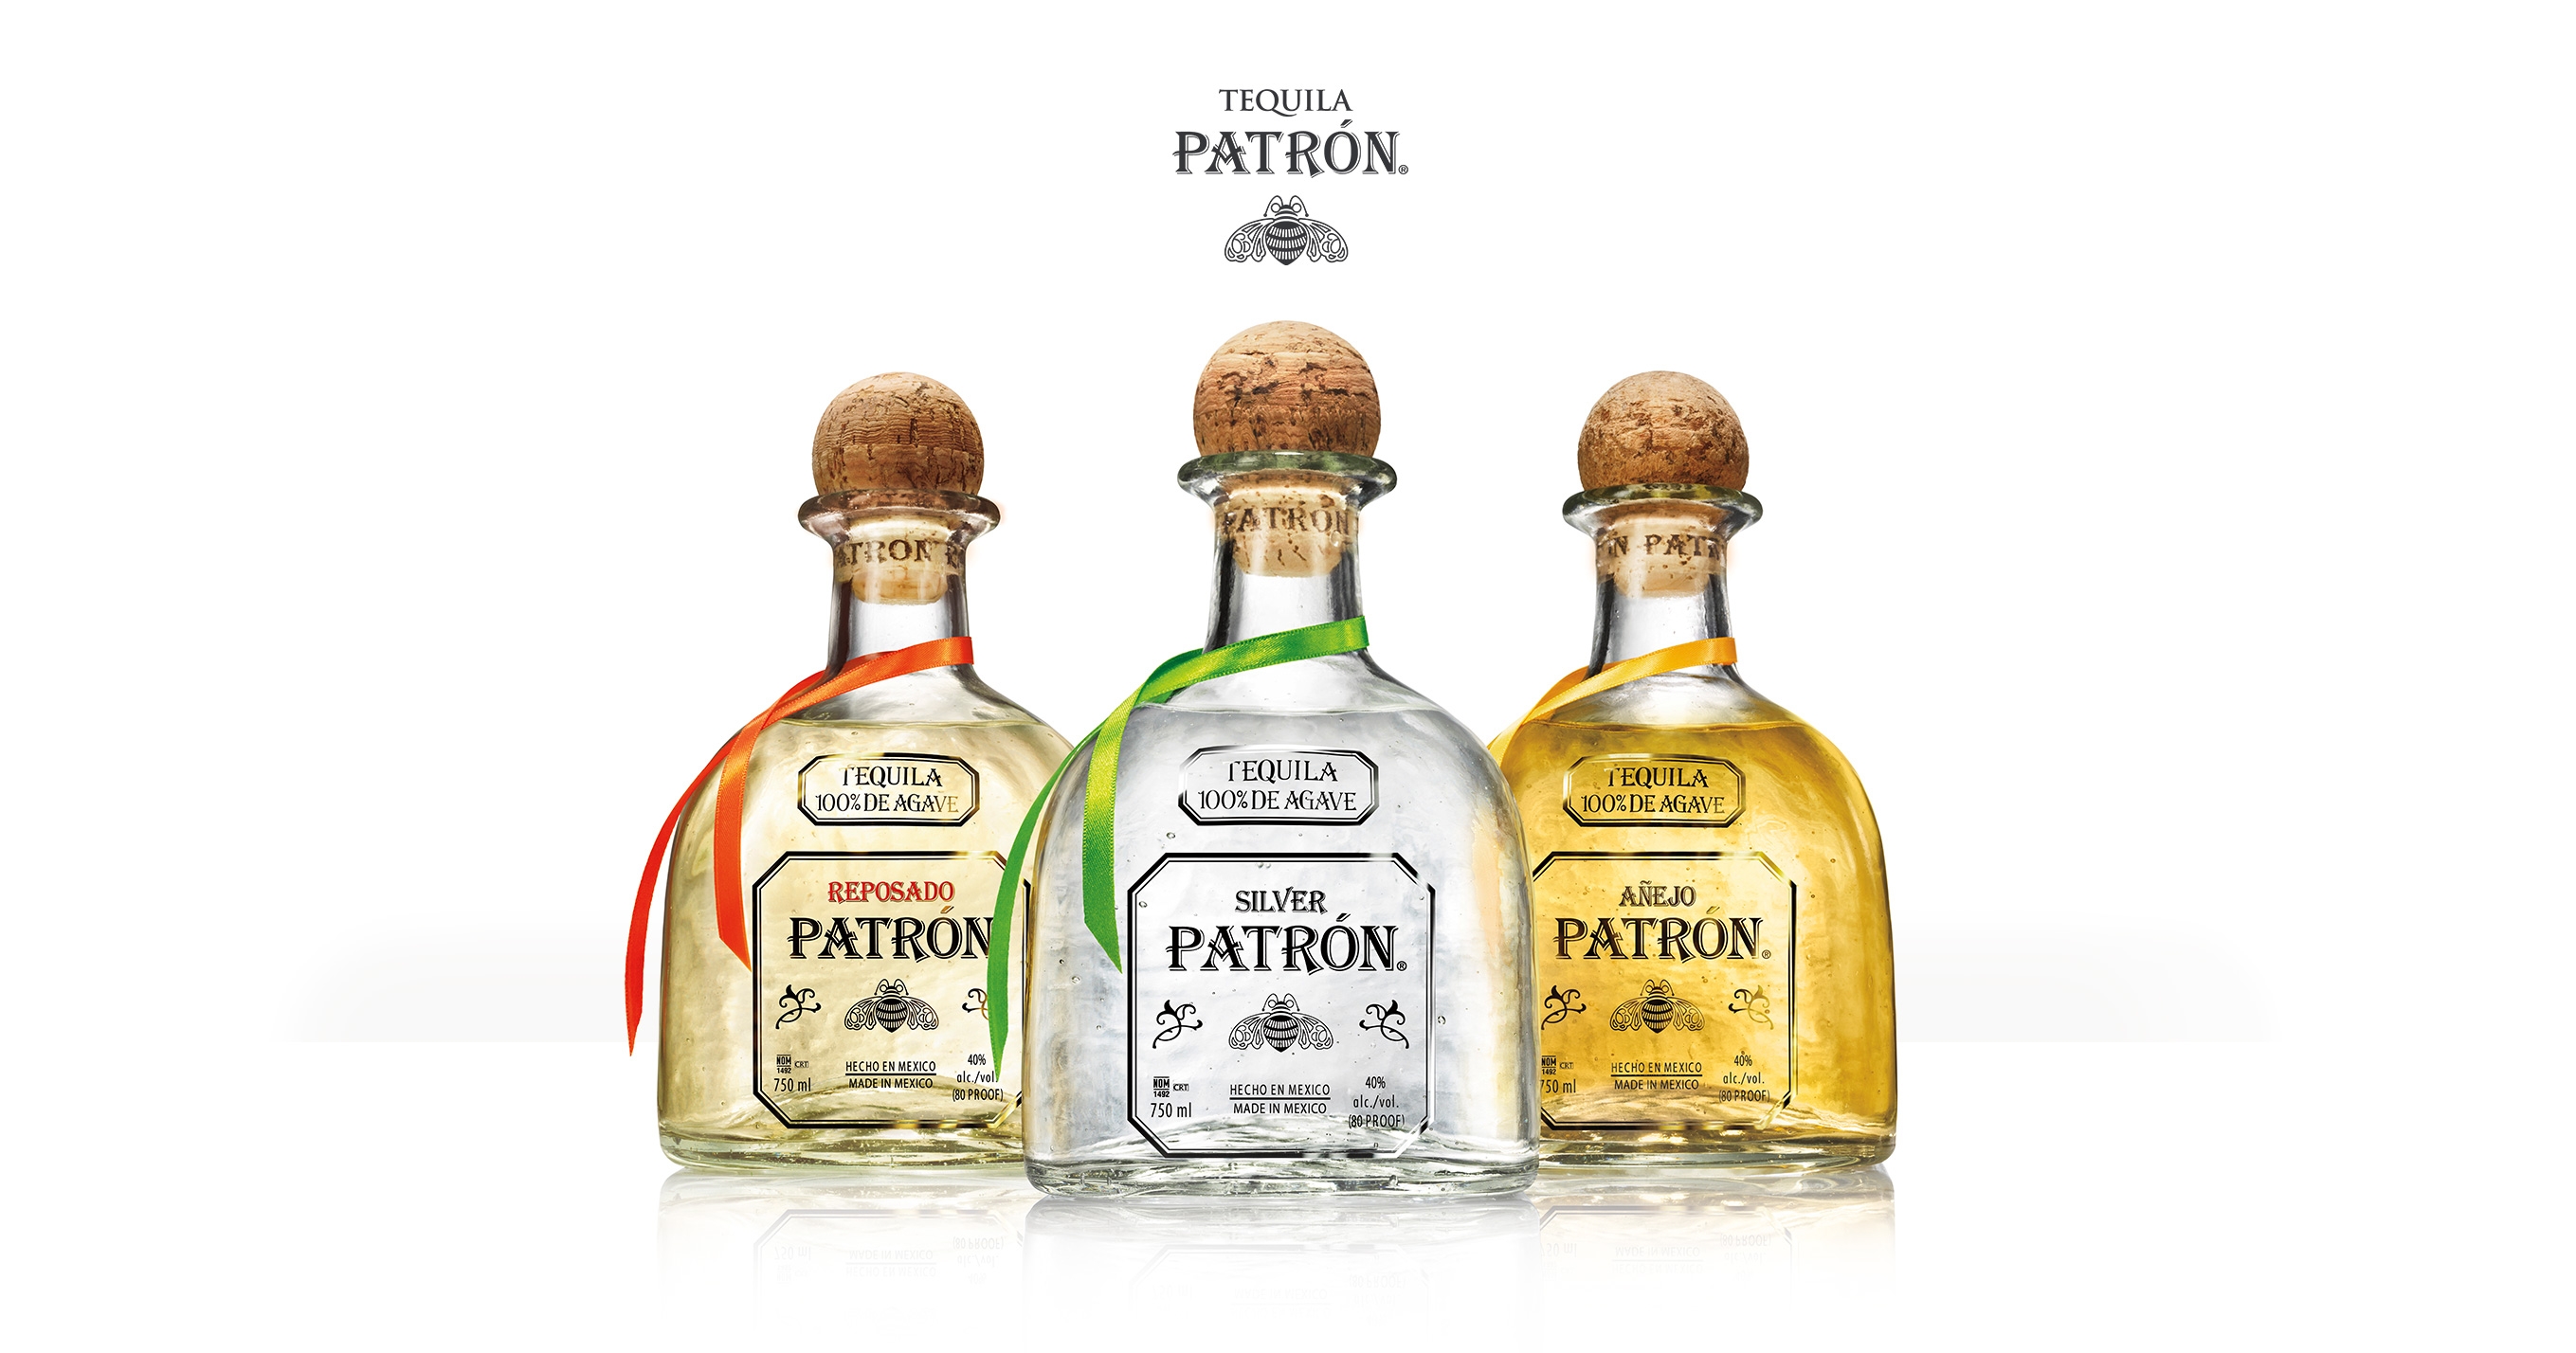 Patron - Tequila & Mezcal | Buy Online or Send as a Gift | ReserveBar